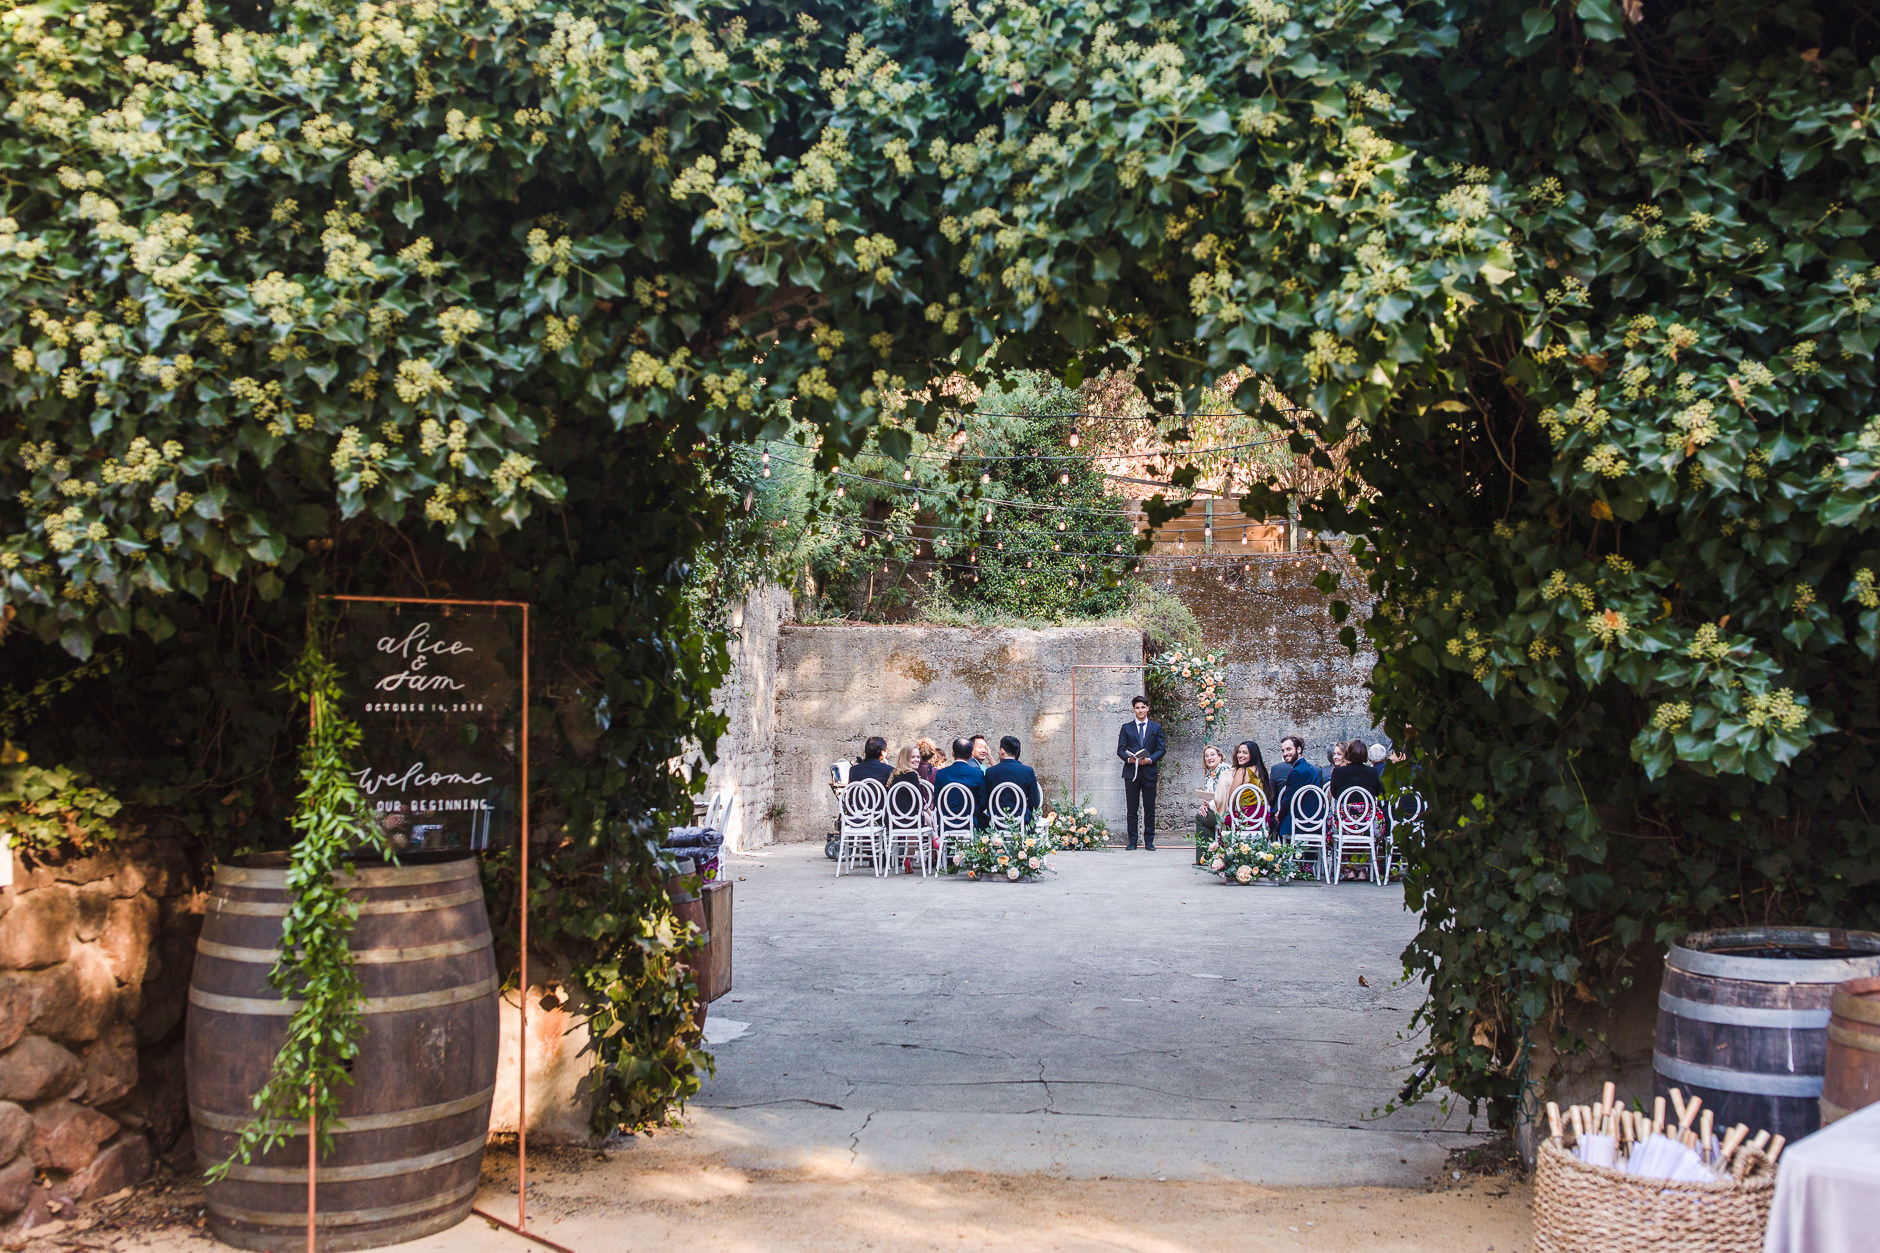 Wedding Ceremony set up in Barrel Room at Sand Rock Farm with stone walls and ivy covered entrance